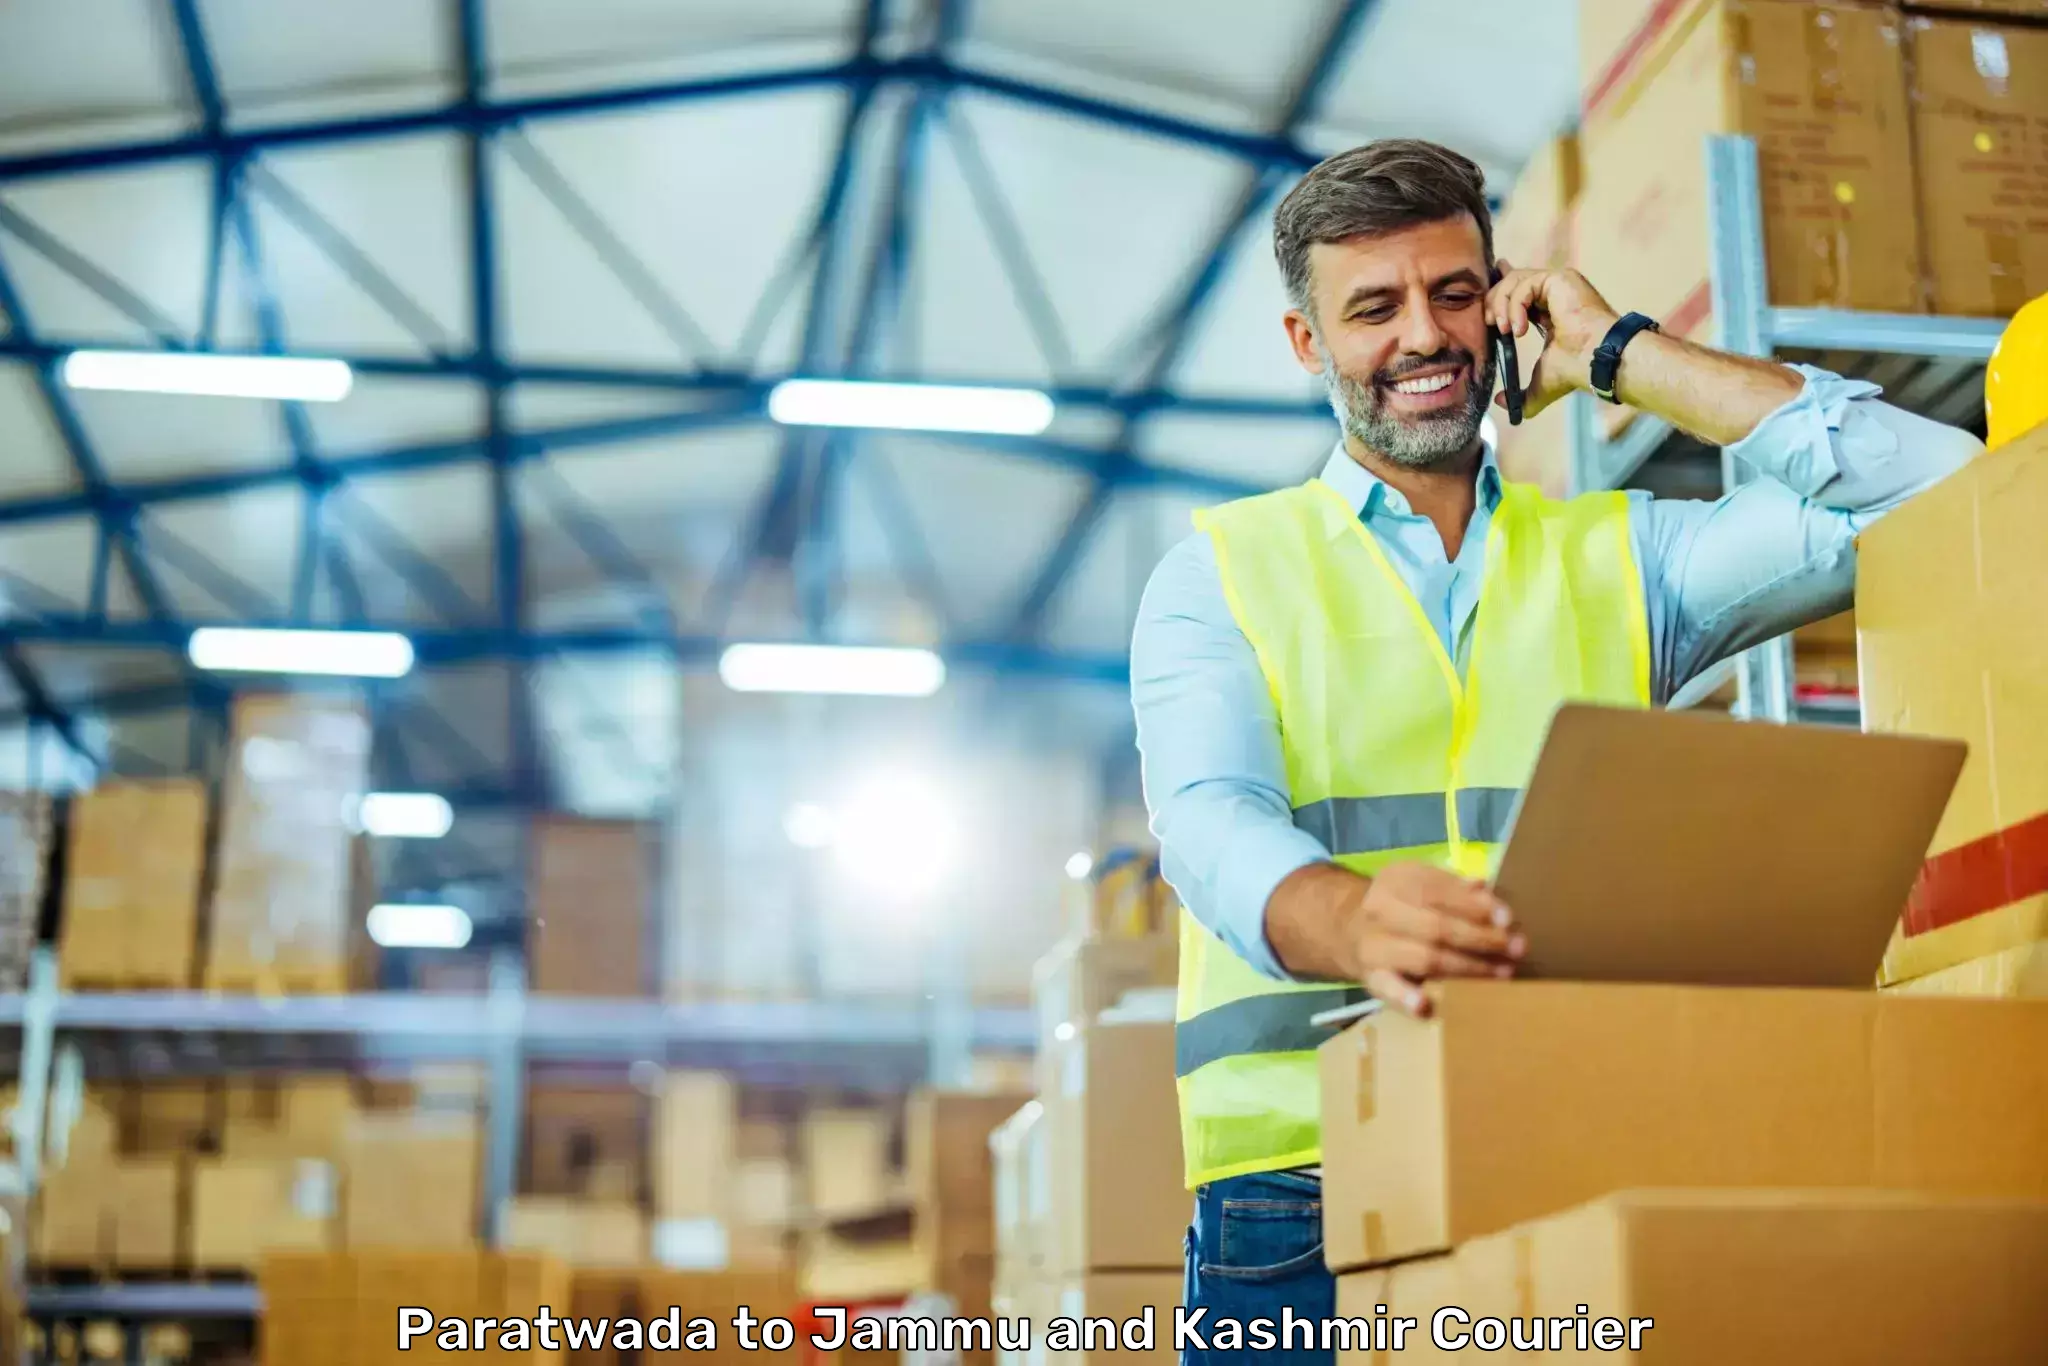 Reliable package handling Paratwada to Rajouri